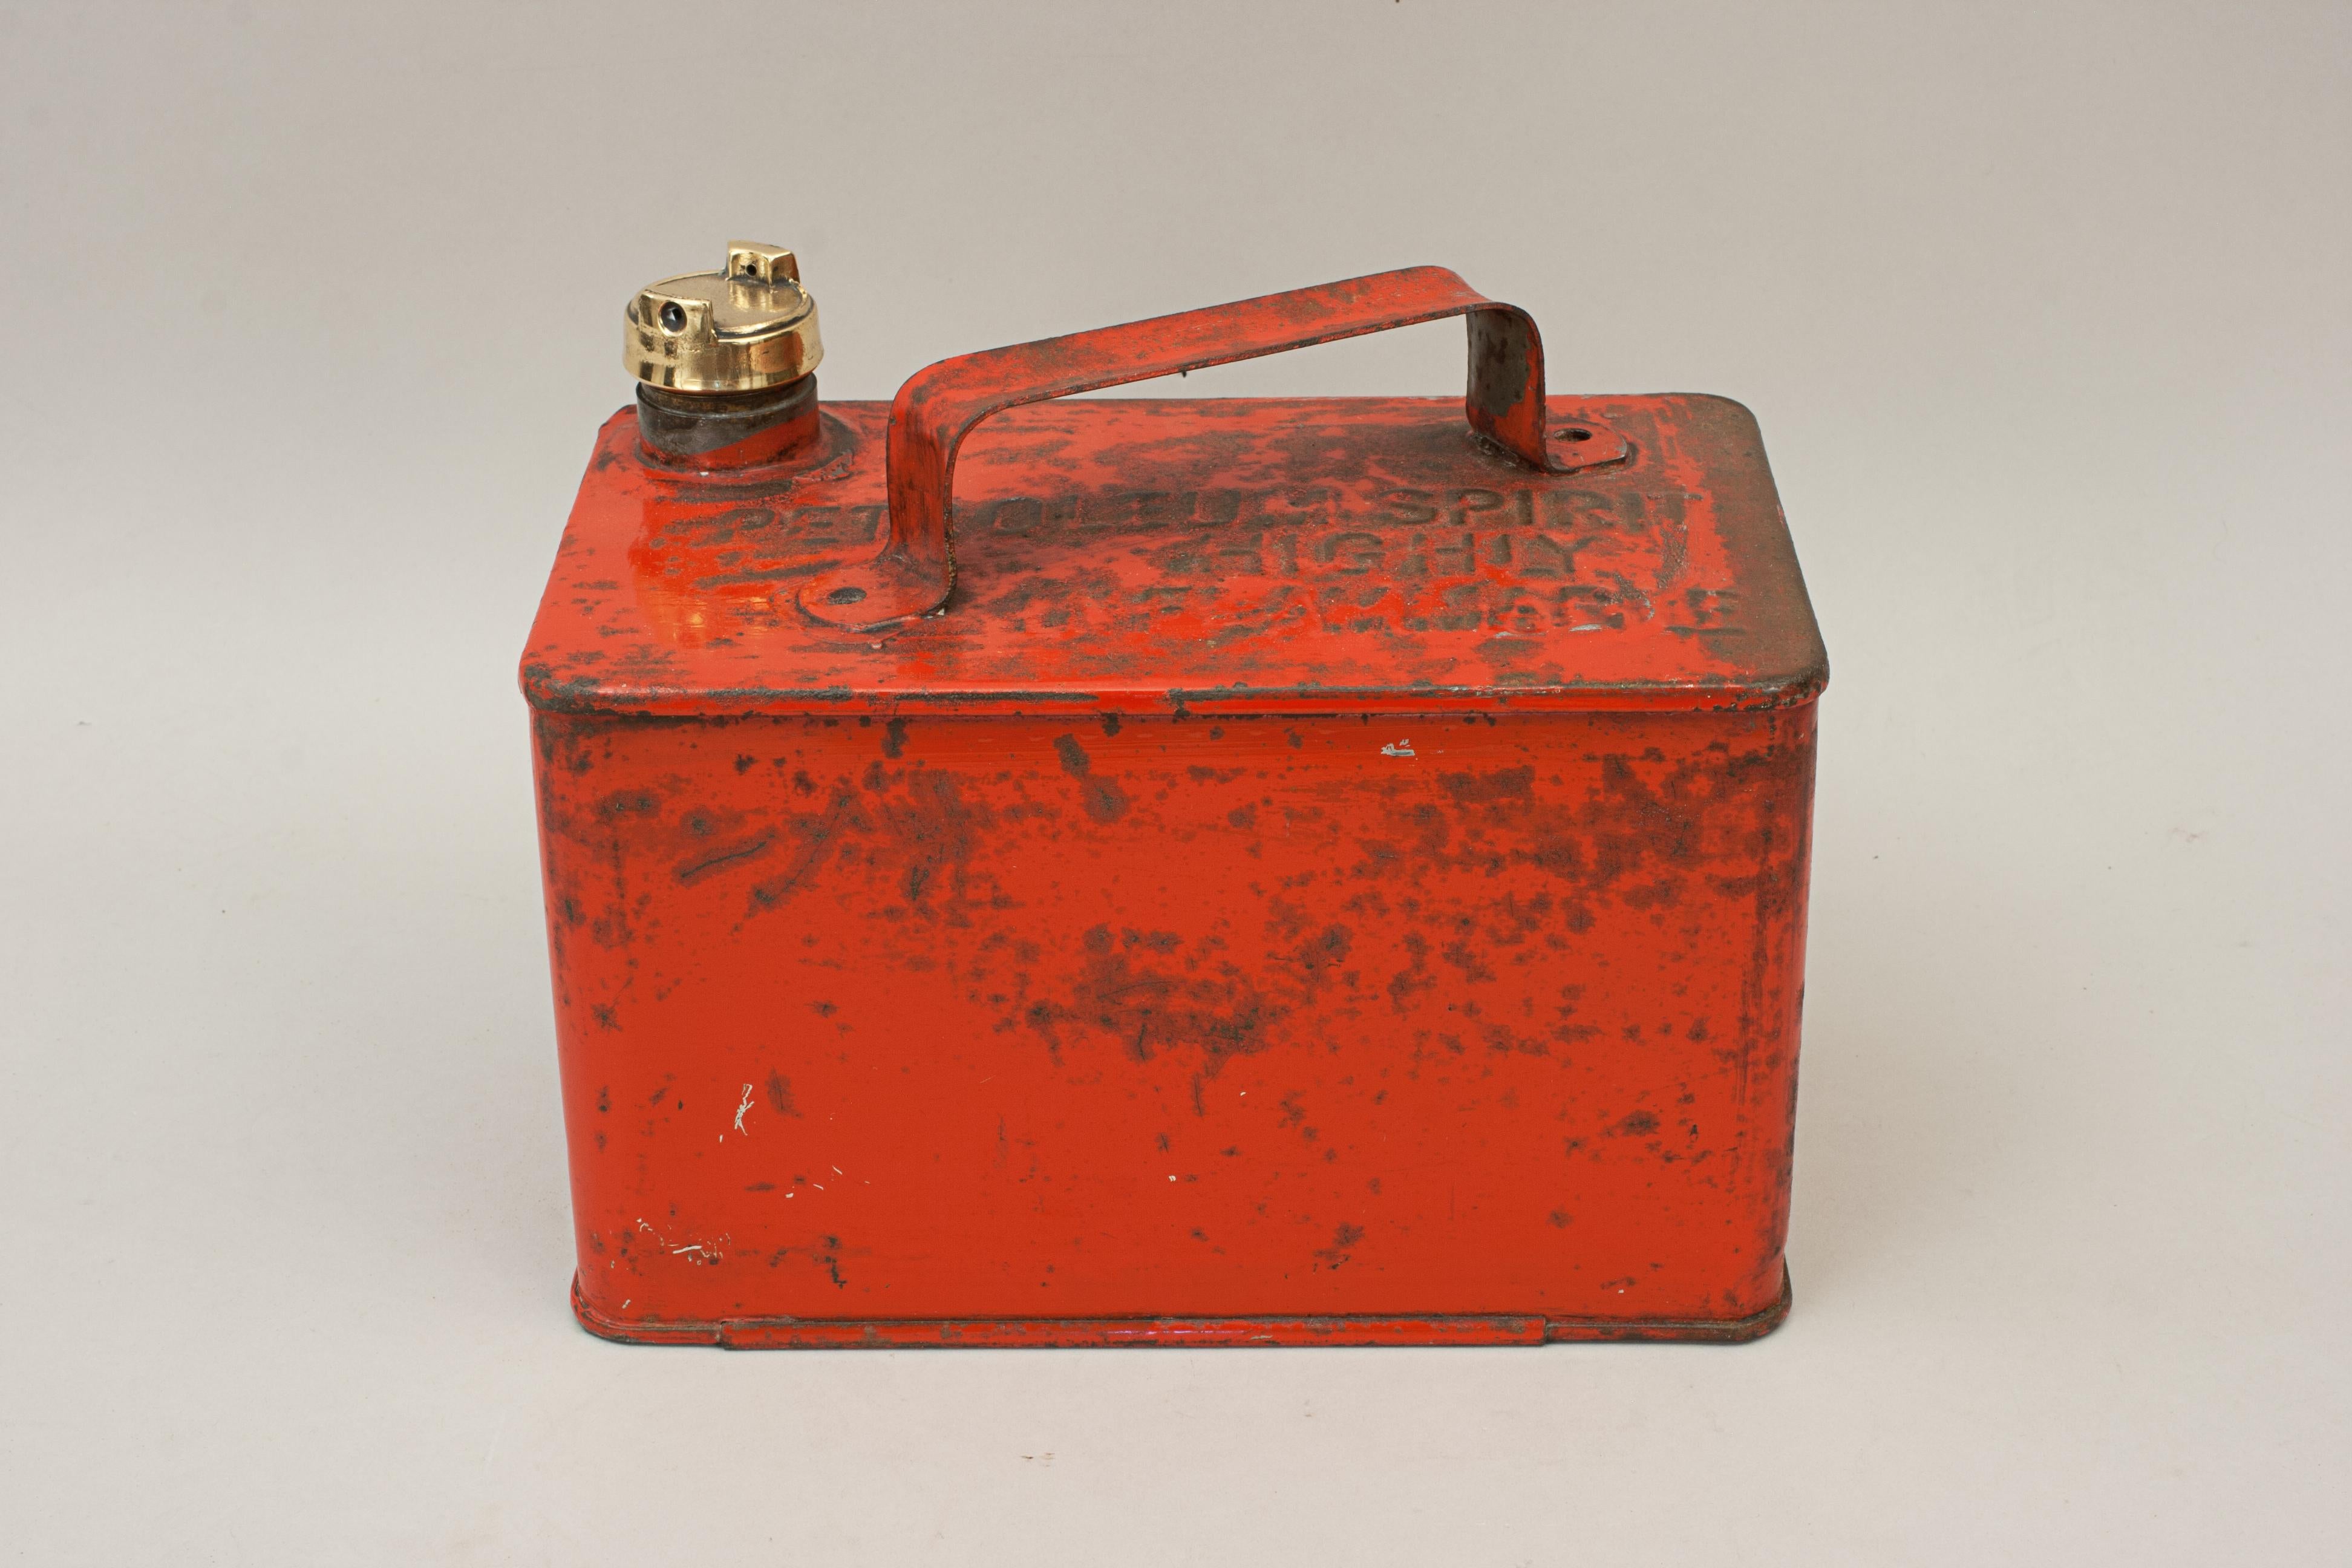 Vintage valor red petroleum spirit petrol can.
An original petroleum spirit petrol can complete with original brass screw cap. The gasoline can has most of the original red paint and embossed on the top are the words 'Petroleum Spirit Highly